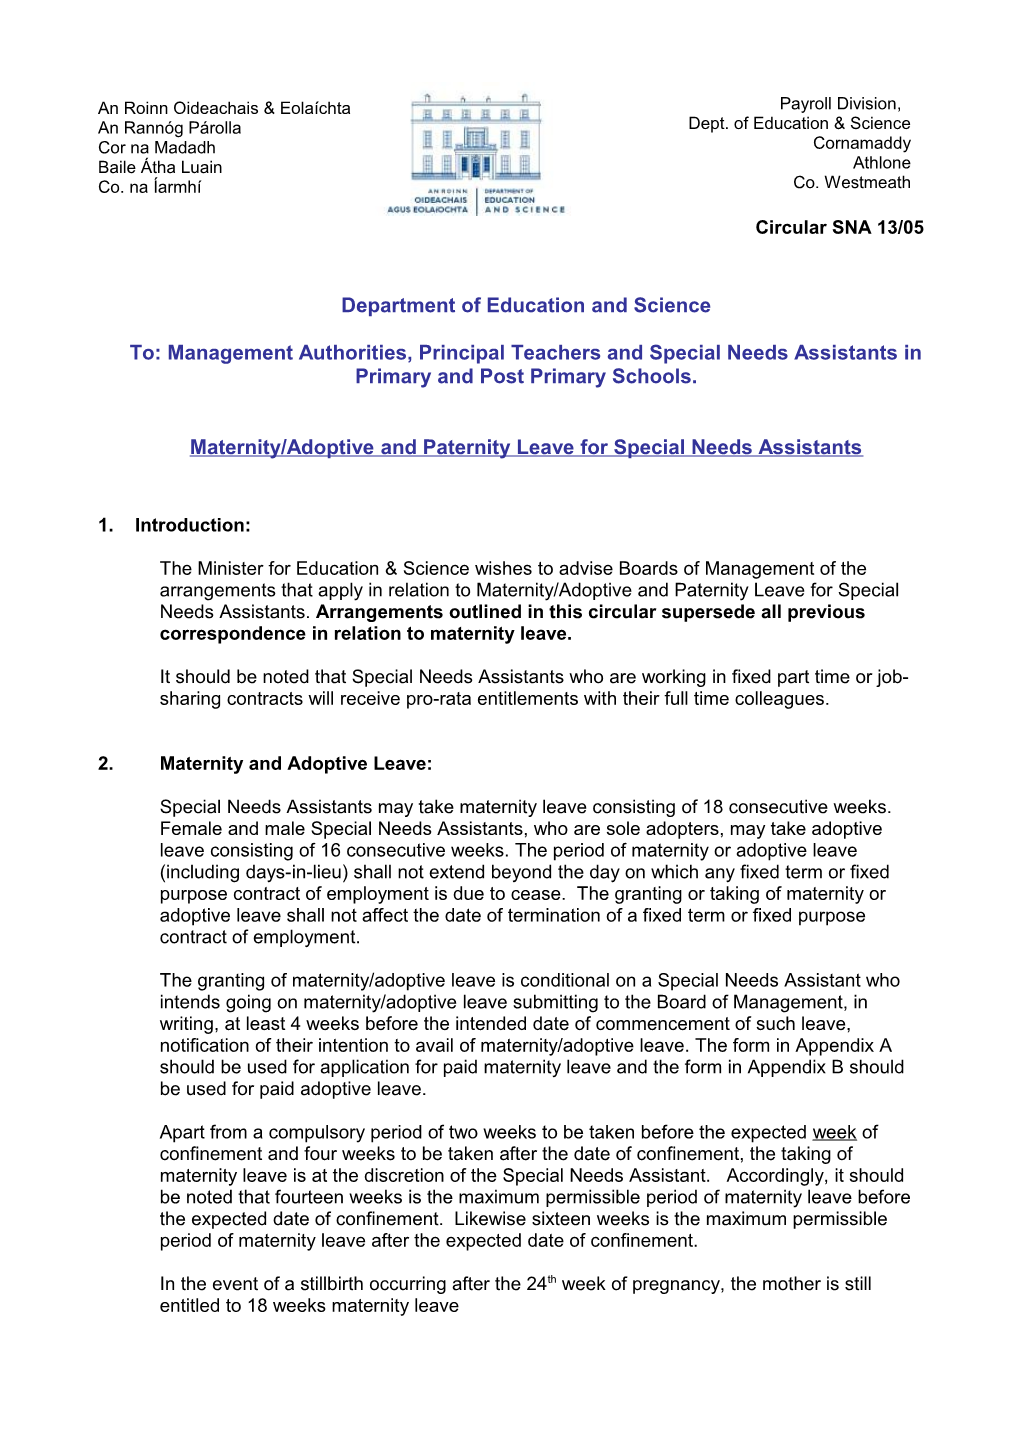 Maternity/Adoptive And Paternity Leave For Special Needs Assistants (File Format Word 163KB)